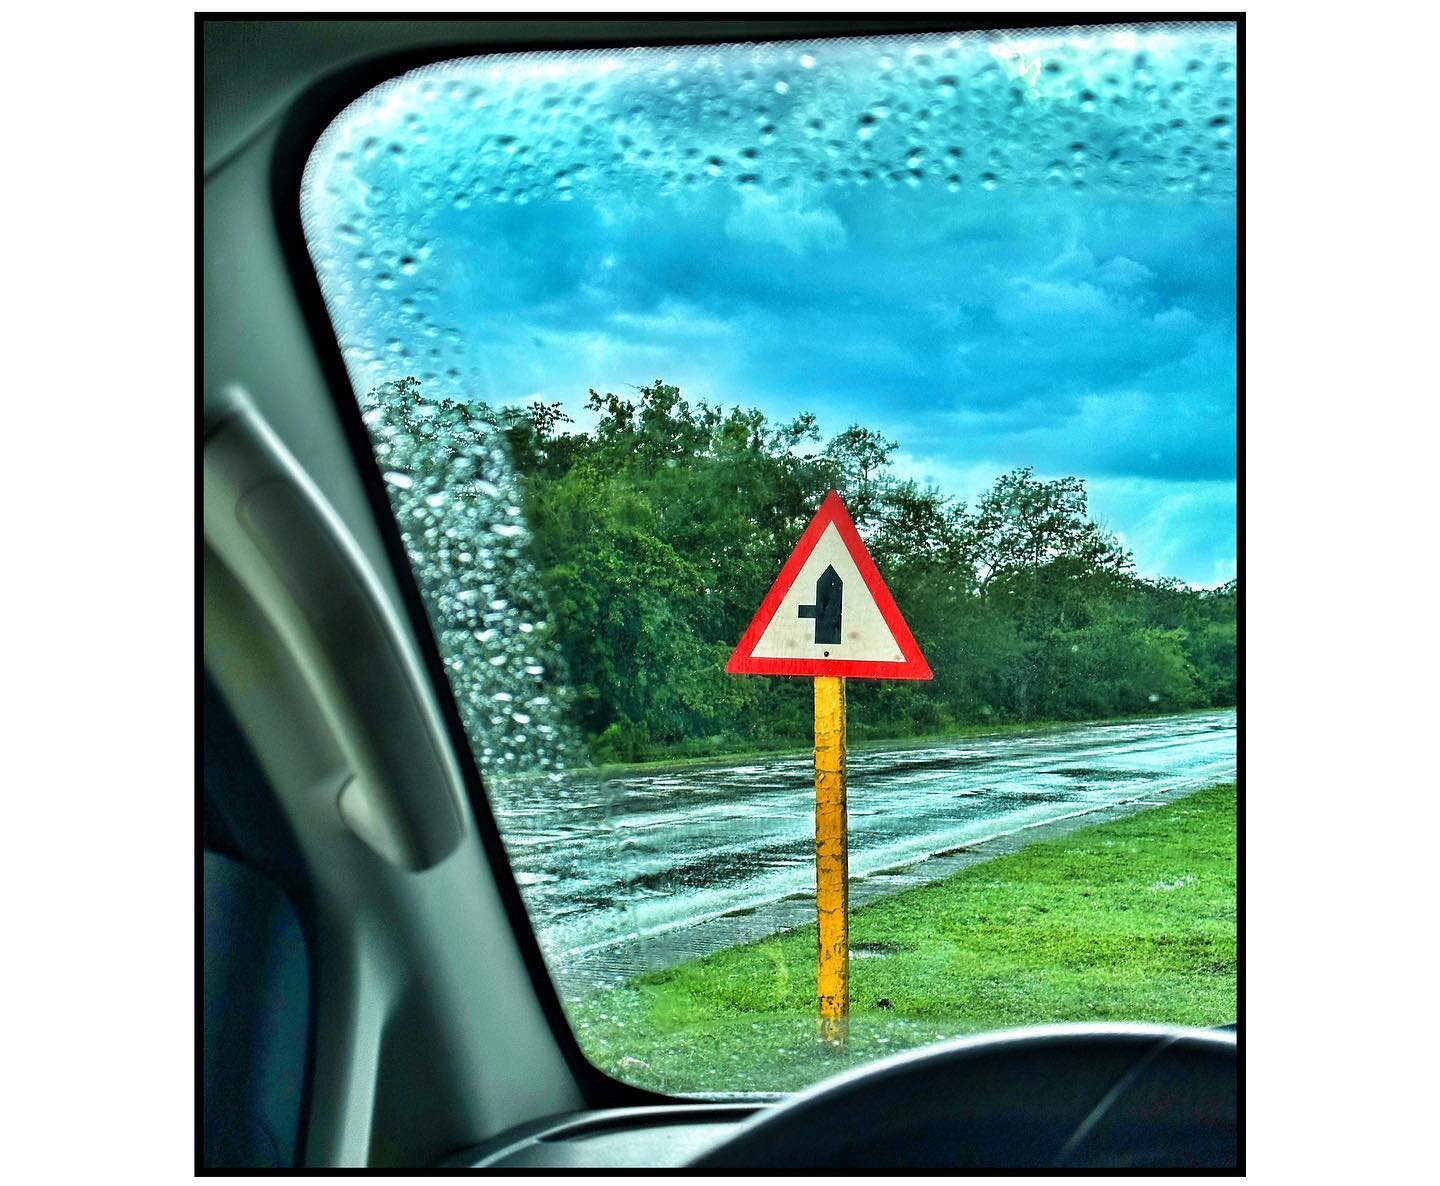 #outmywindow This is the sign after the turn that tells you to turn because the right side of the highway was ending. This is Cuba. The view never gets old as it&rsquo;s always the start of a new adventure.  Join me on a workshop www.cameraodysseys.c